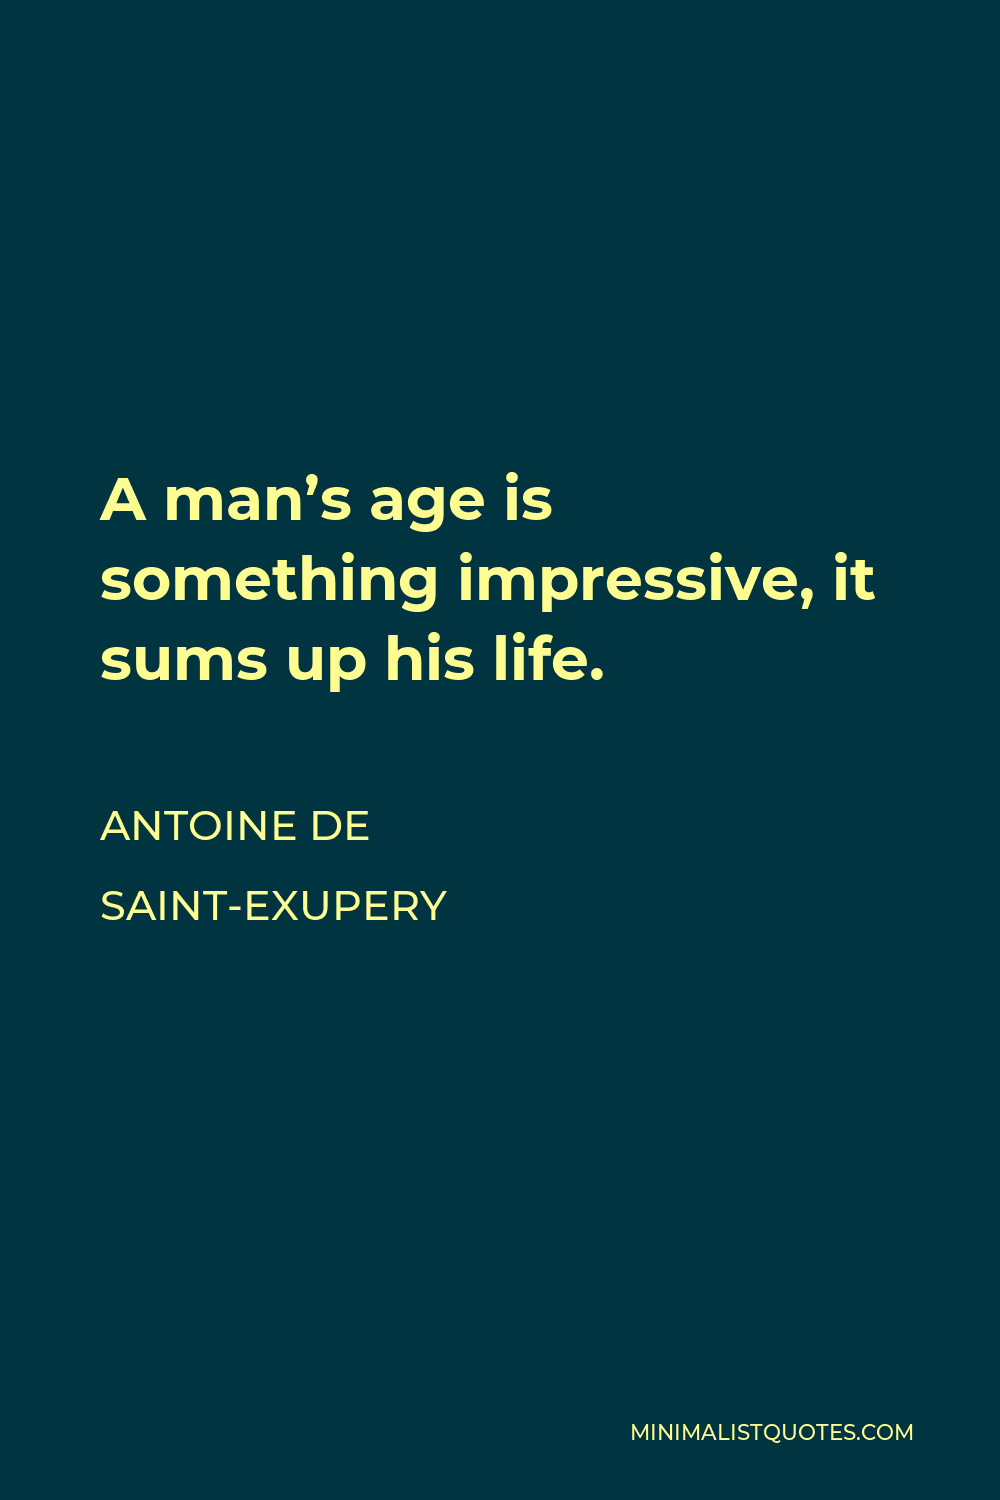 Antoine de Saint-Exupery Quote - A man’s age is something impressive, it sums up his life.